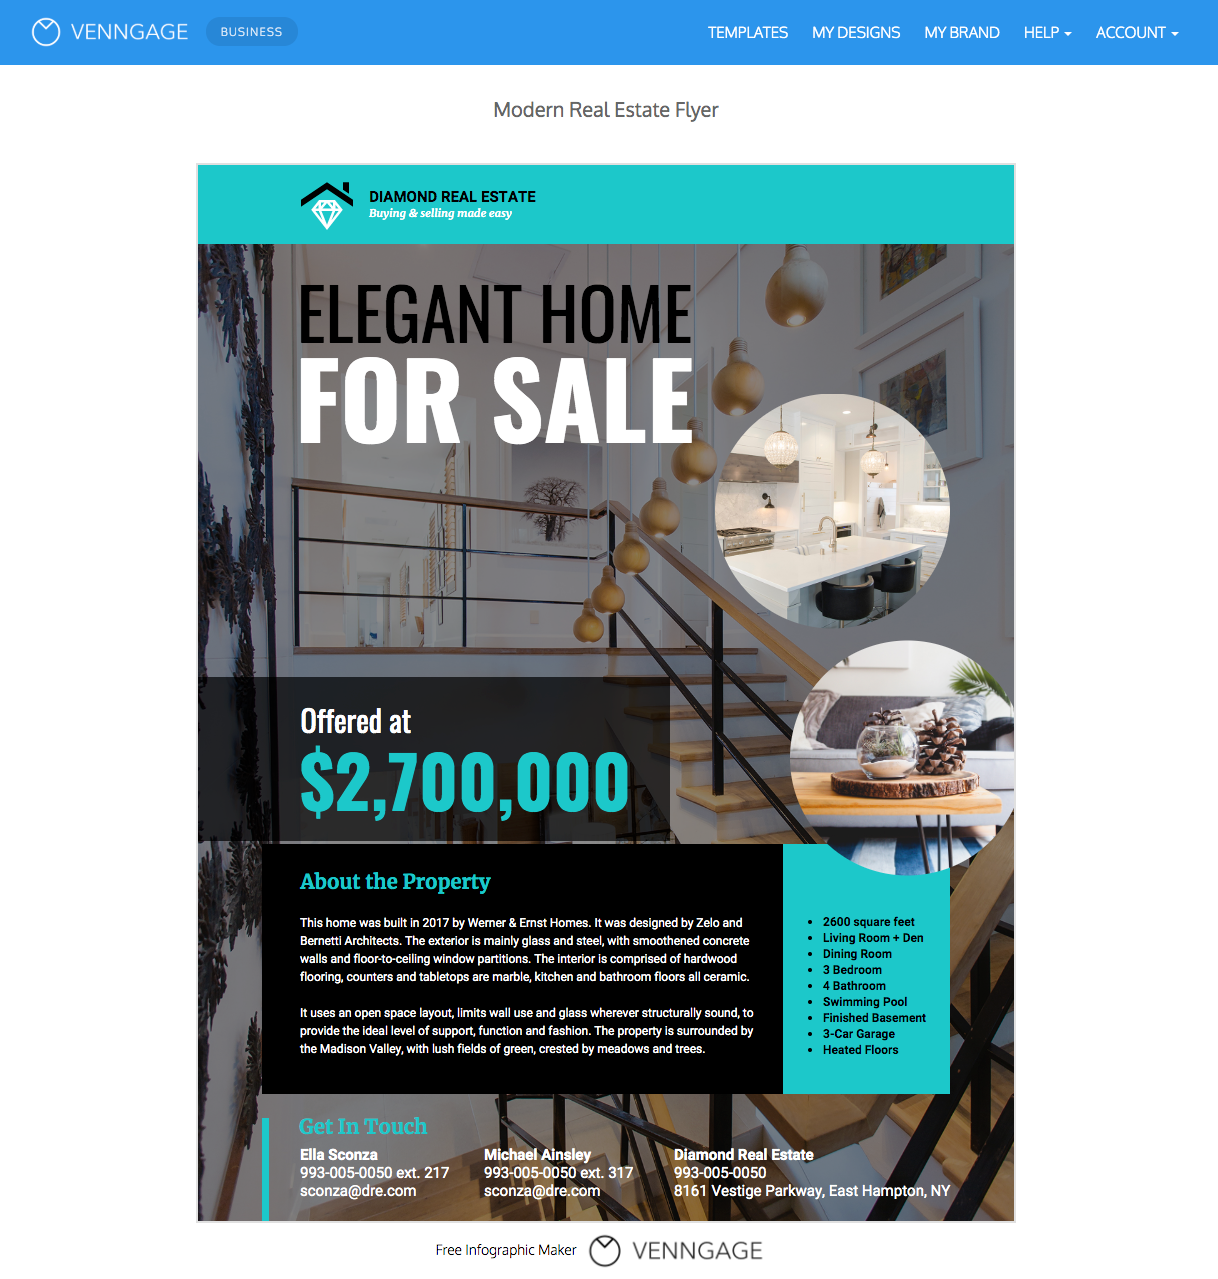 Real estate flyer templates by Venngage Within Land For Sale Flyer Template For Land For Sale Flyer Template